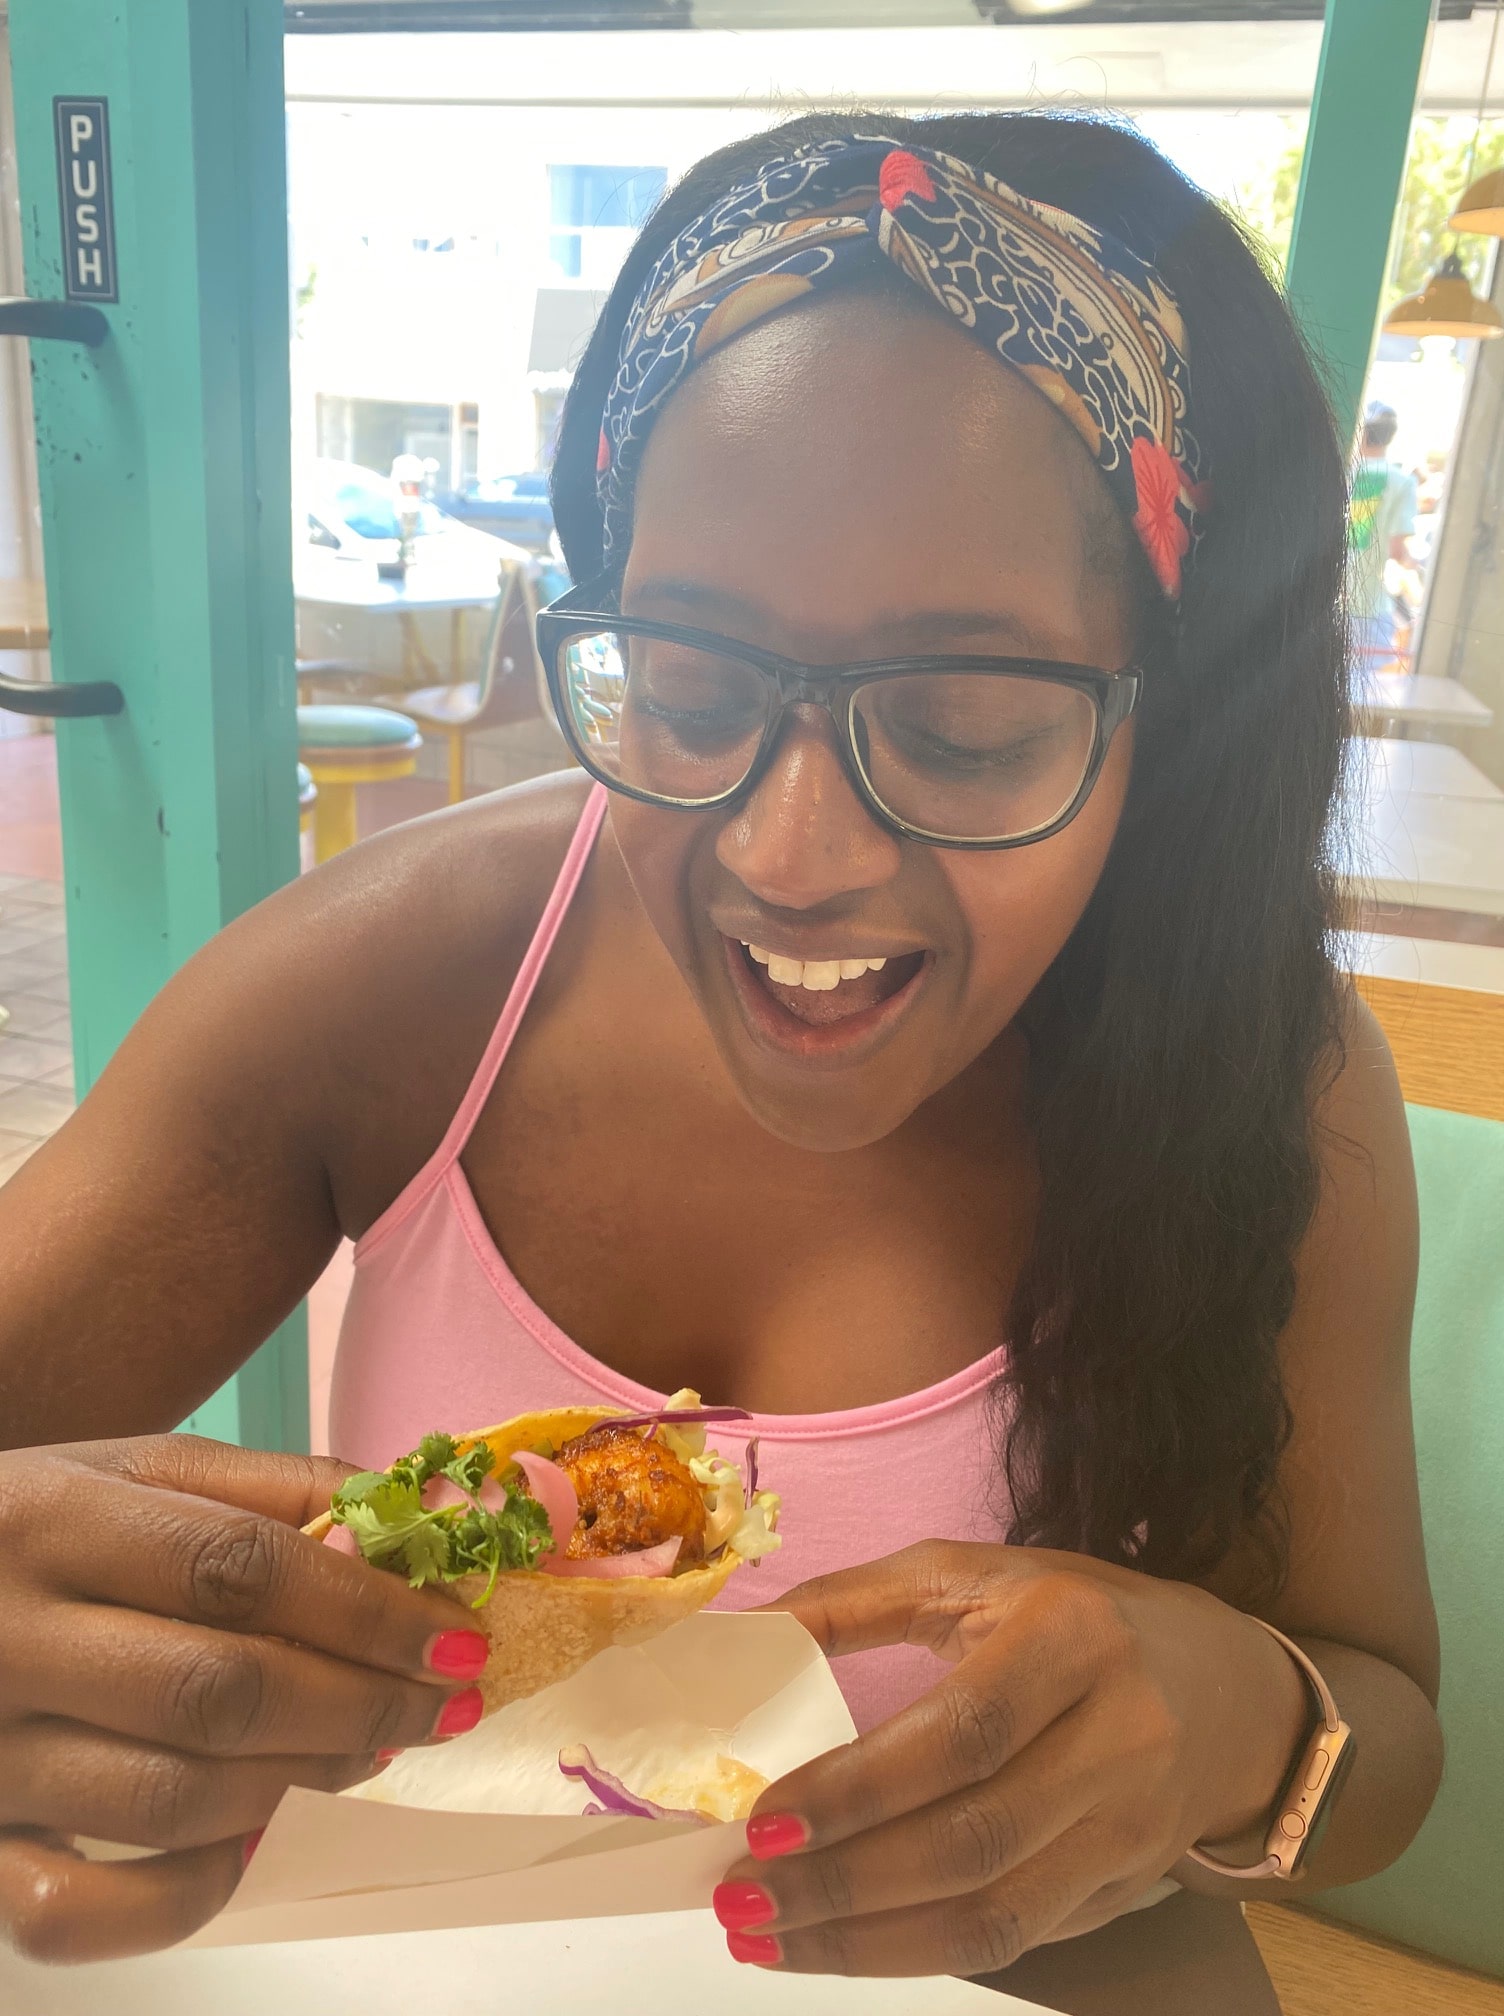 An image of lifestyle blogger Ariel eating a taco.